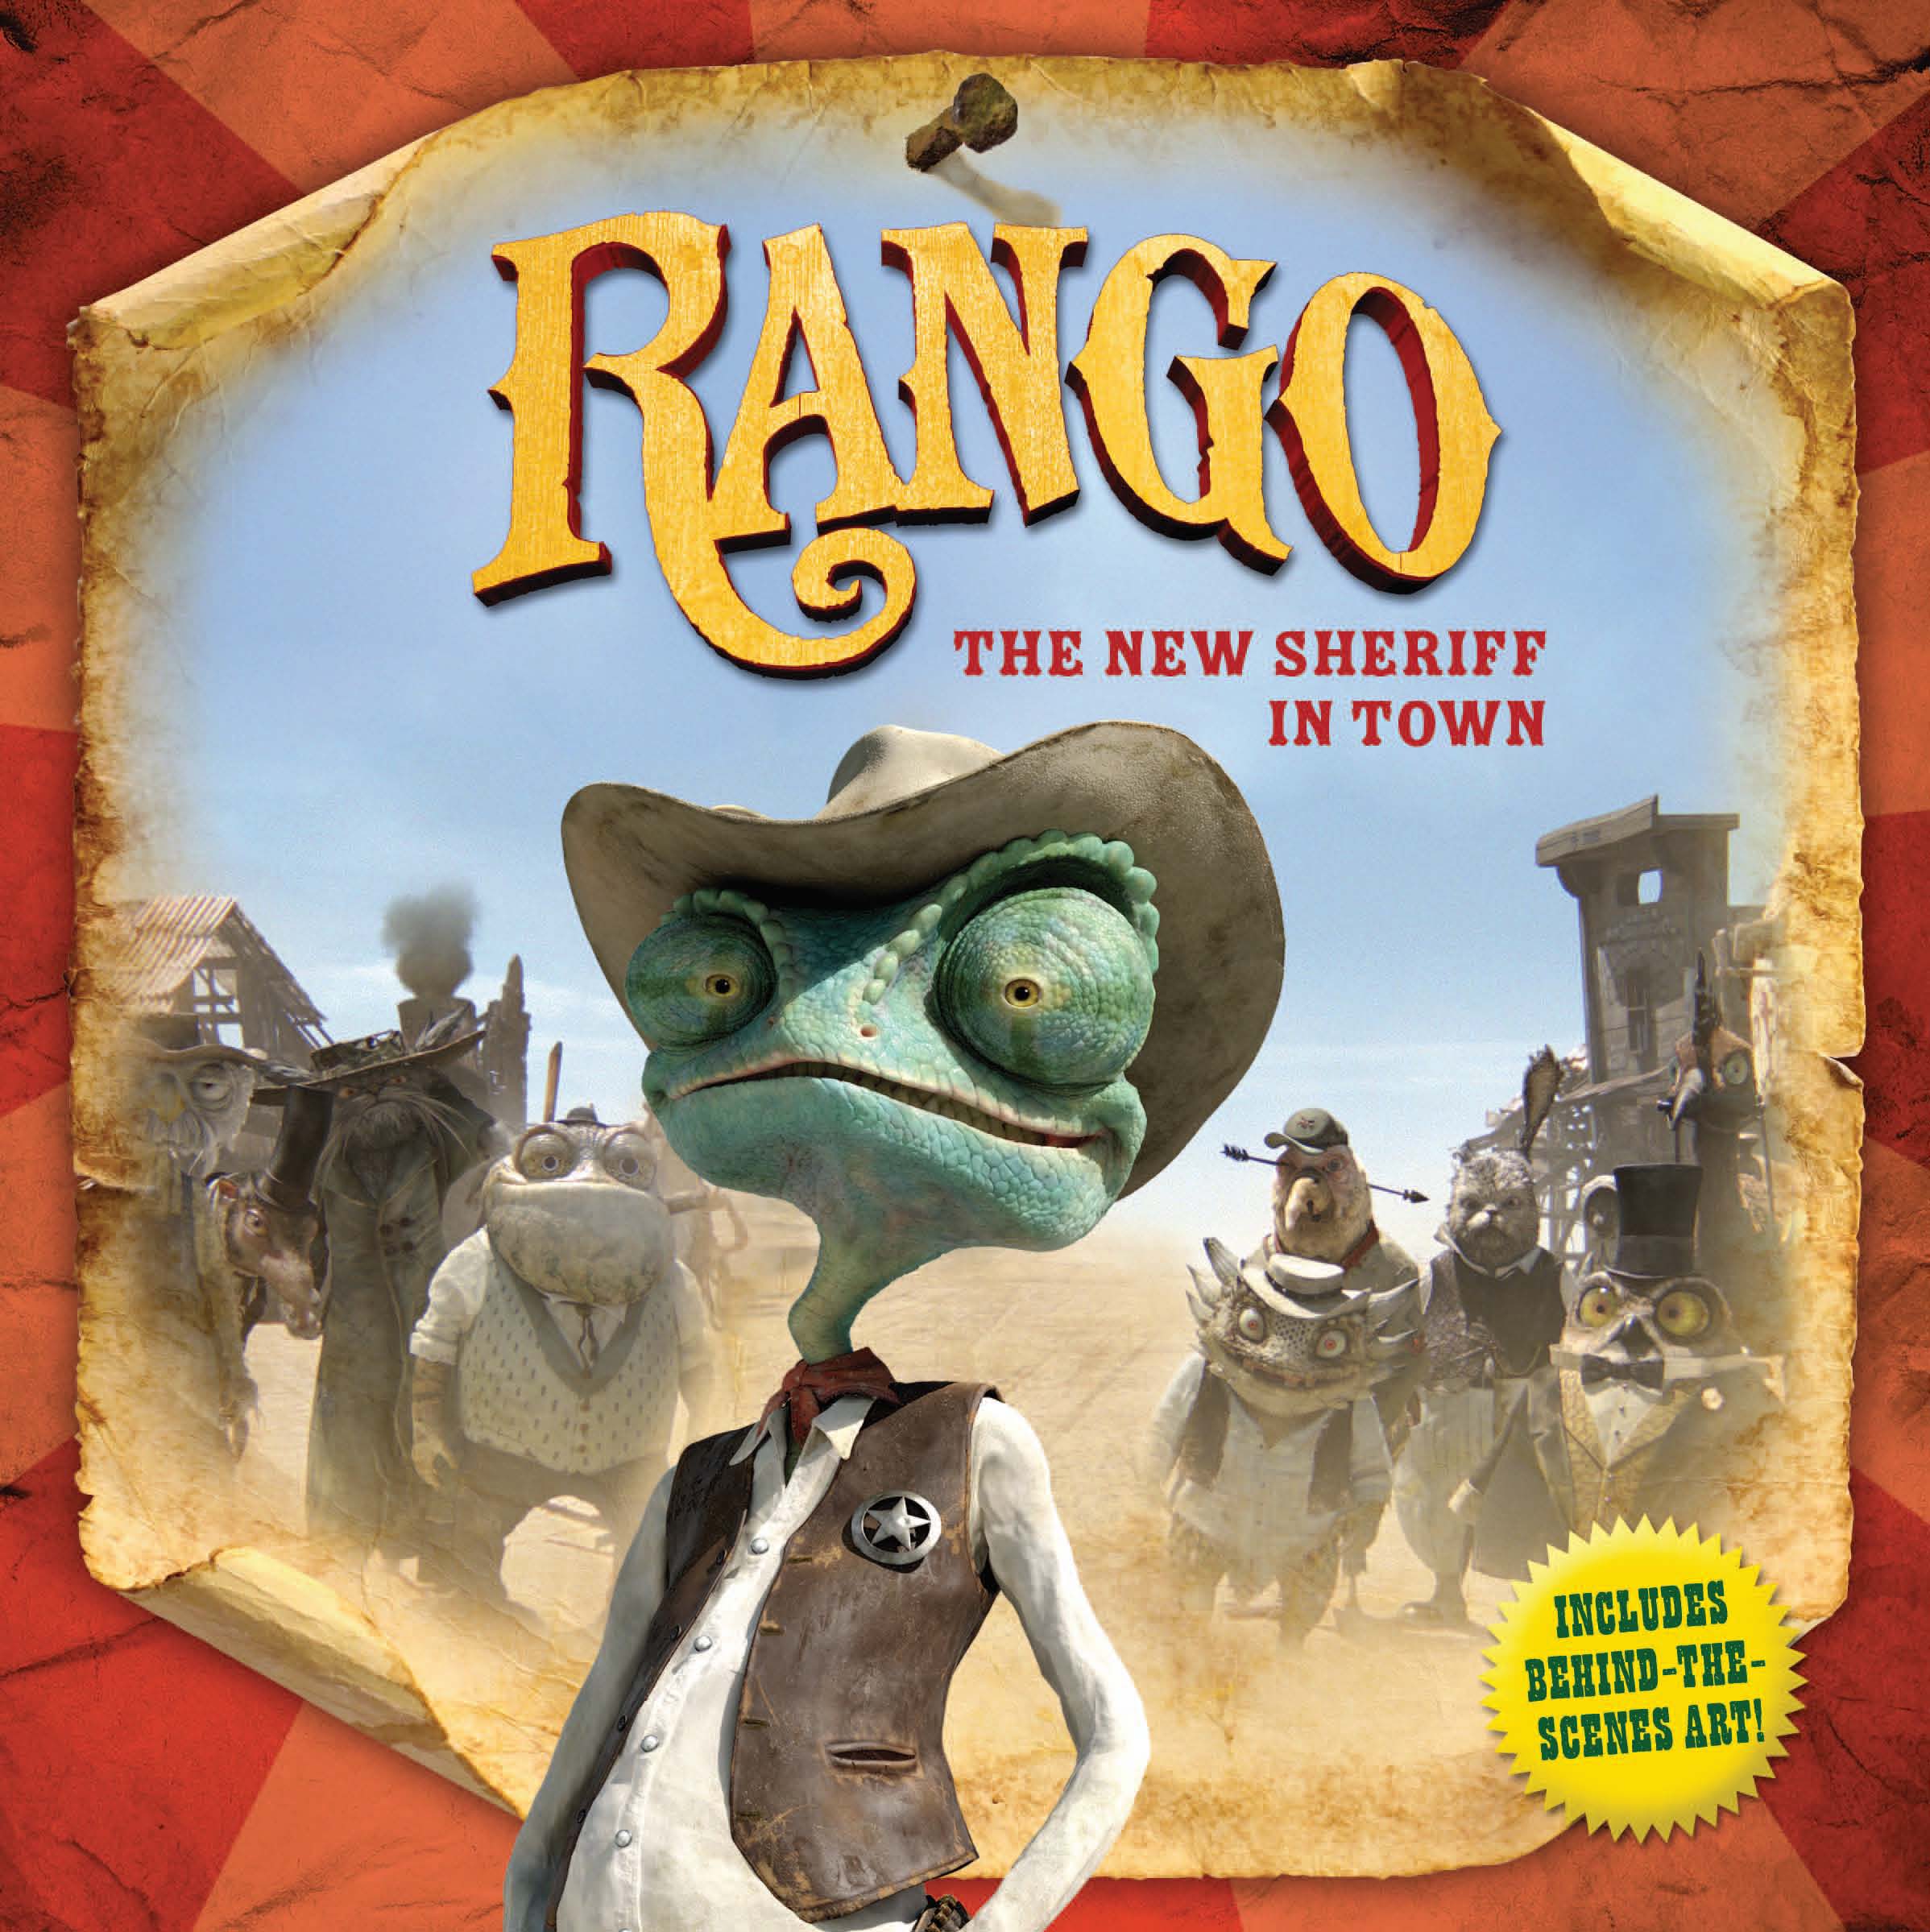 Read All About Rango!